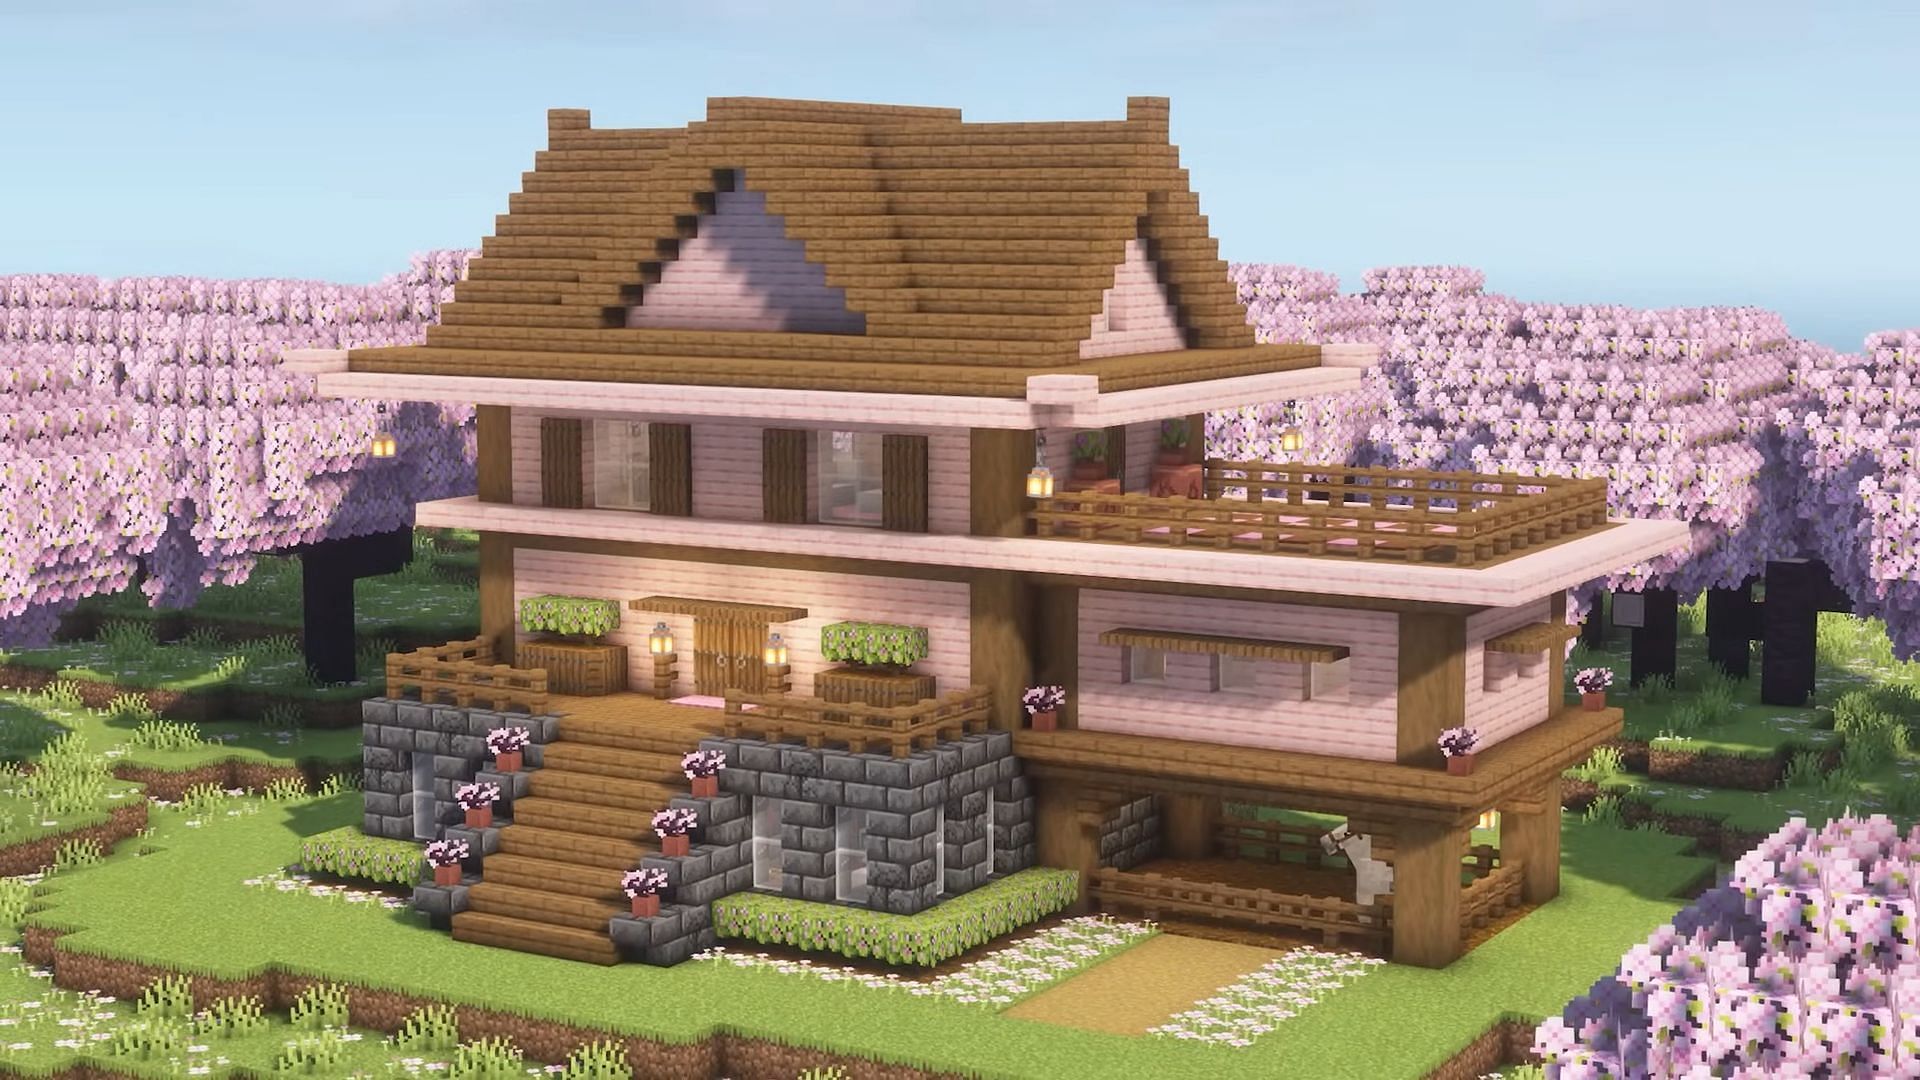 A cherry blossom mansion (Image via YouTube/Rizzial)